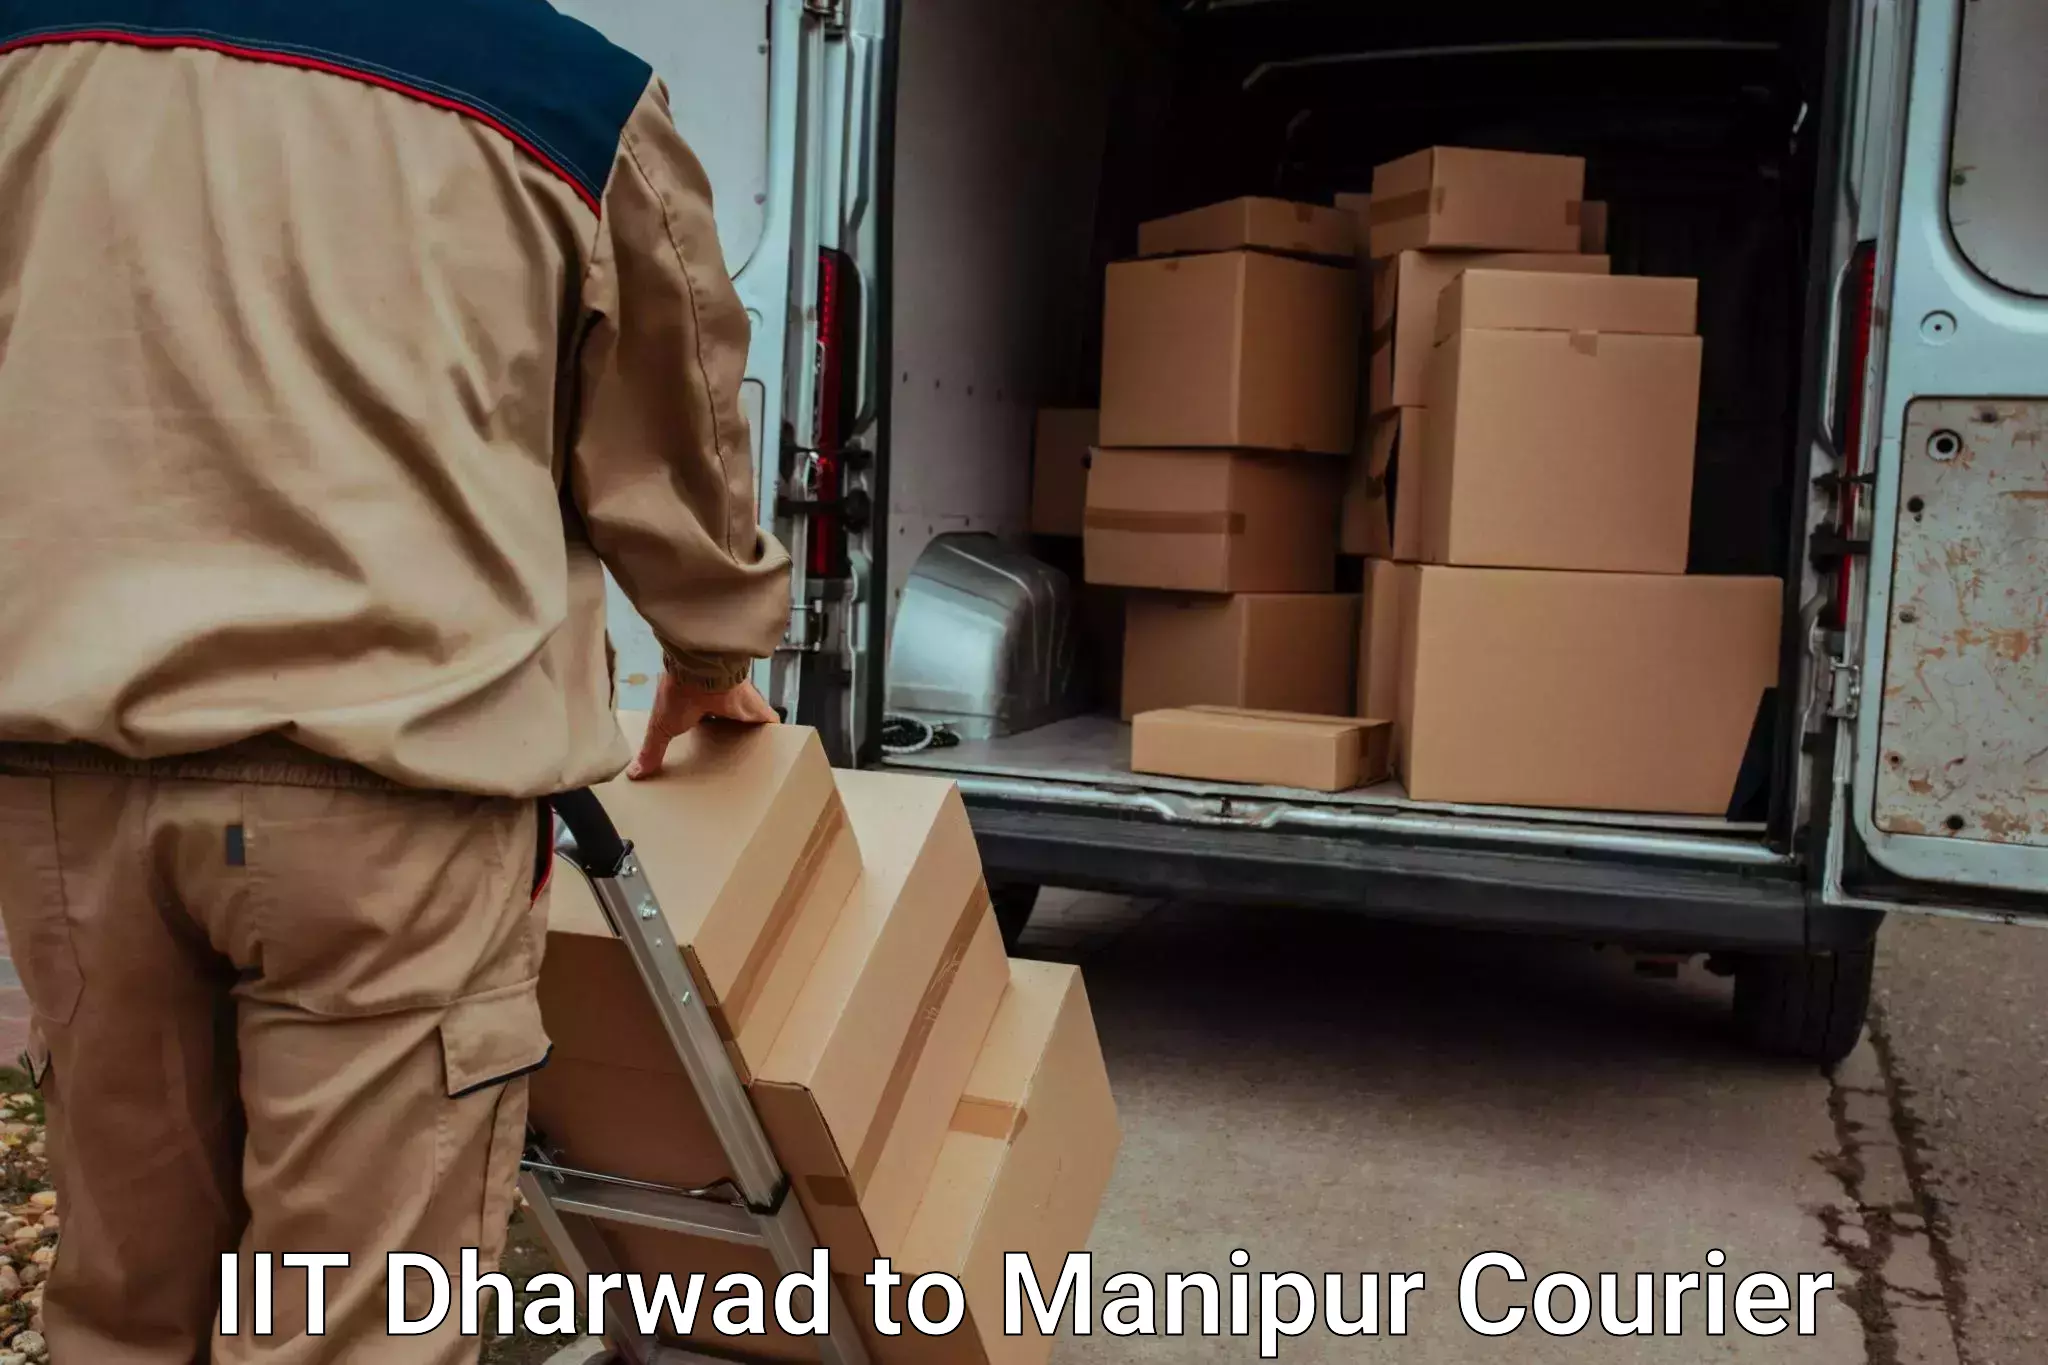 Furniture transport specialists IIT Dharwad to Manipur